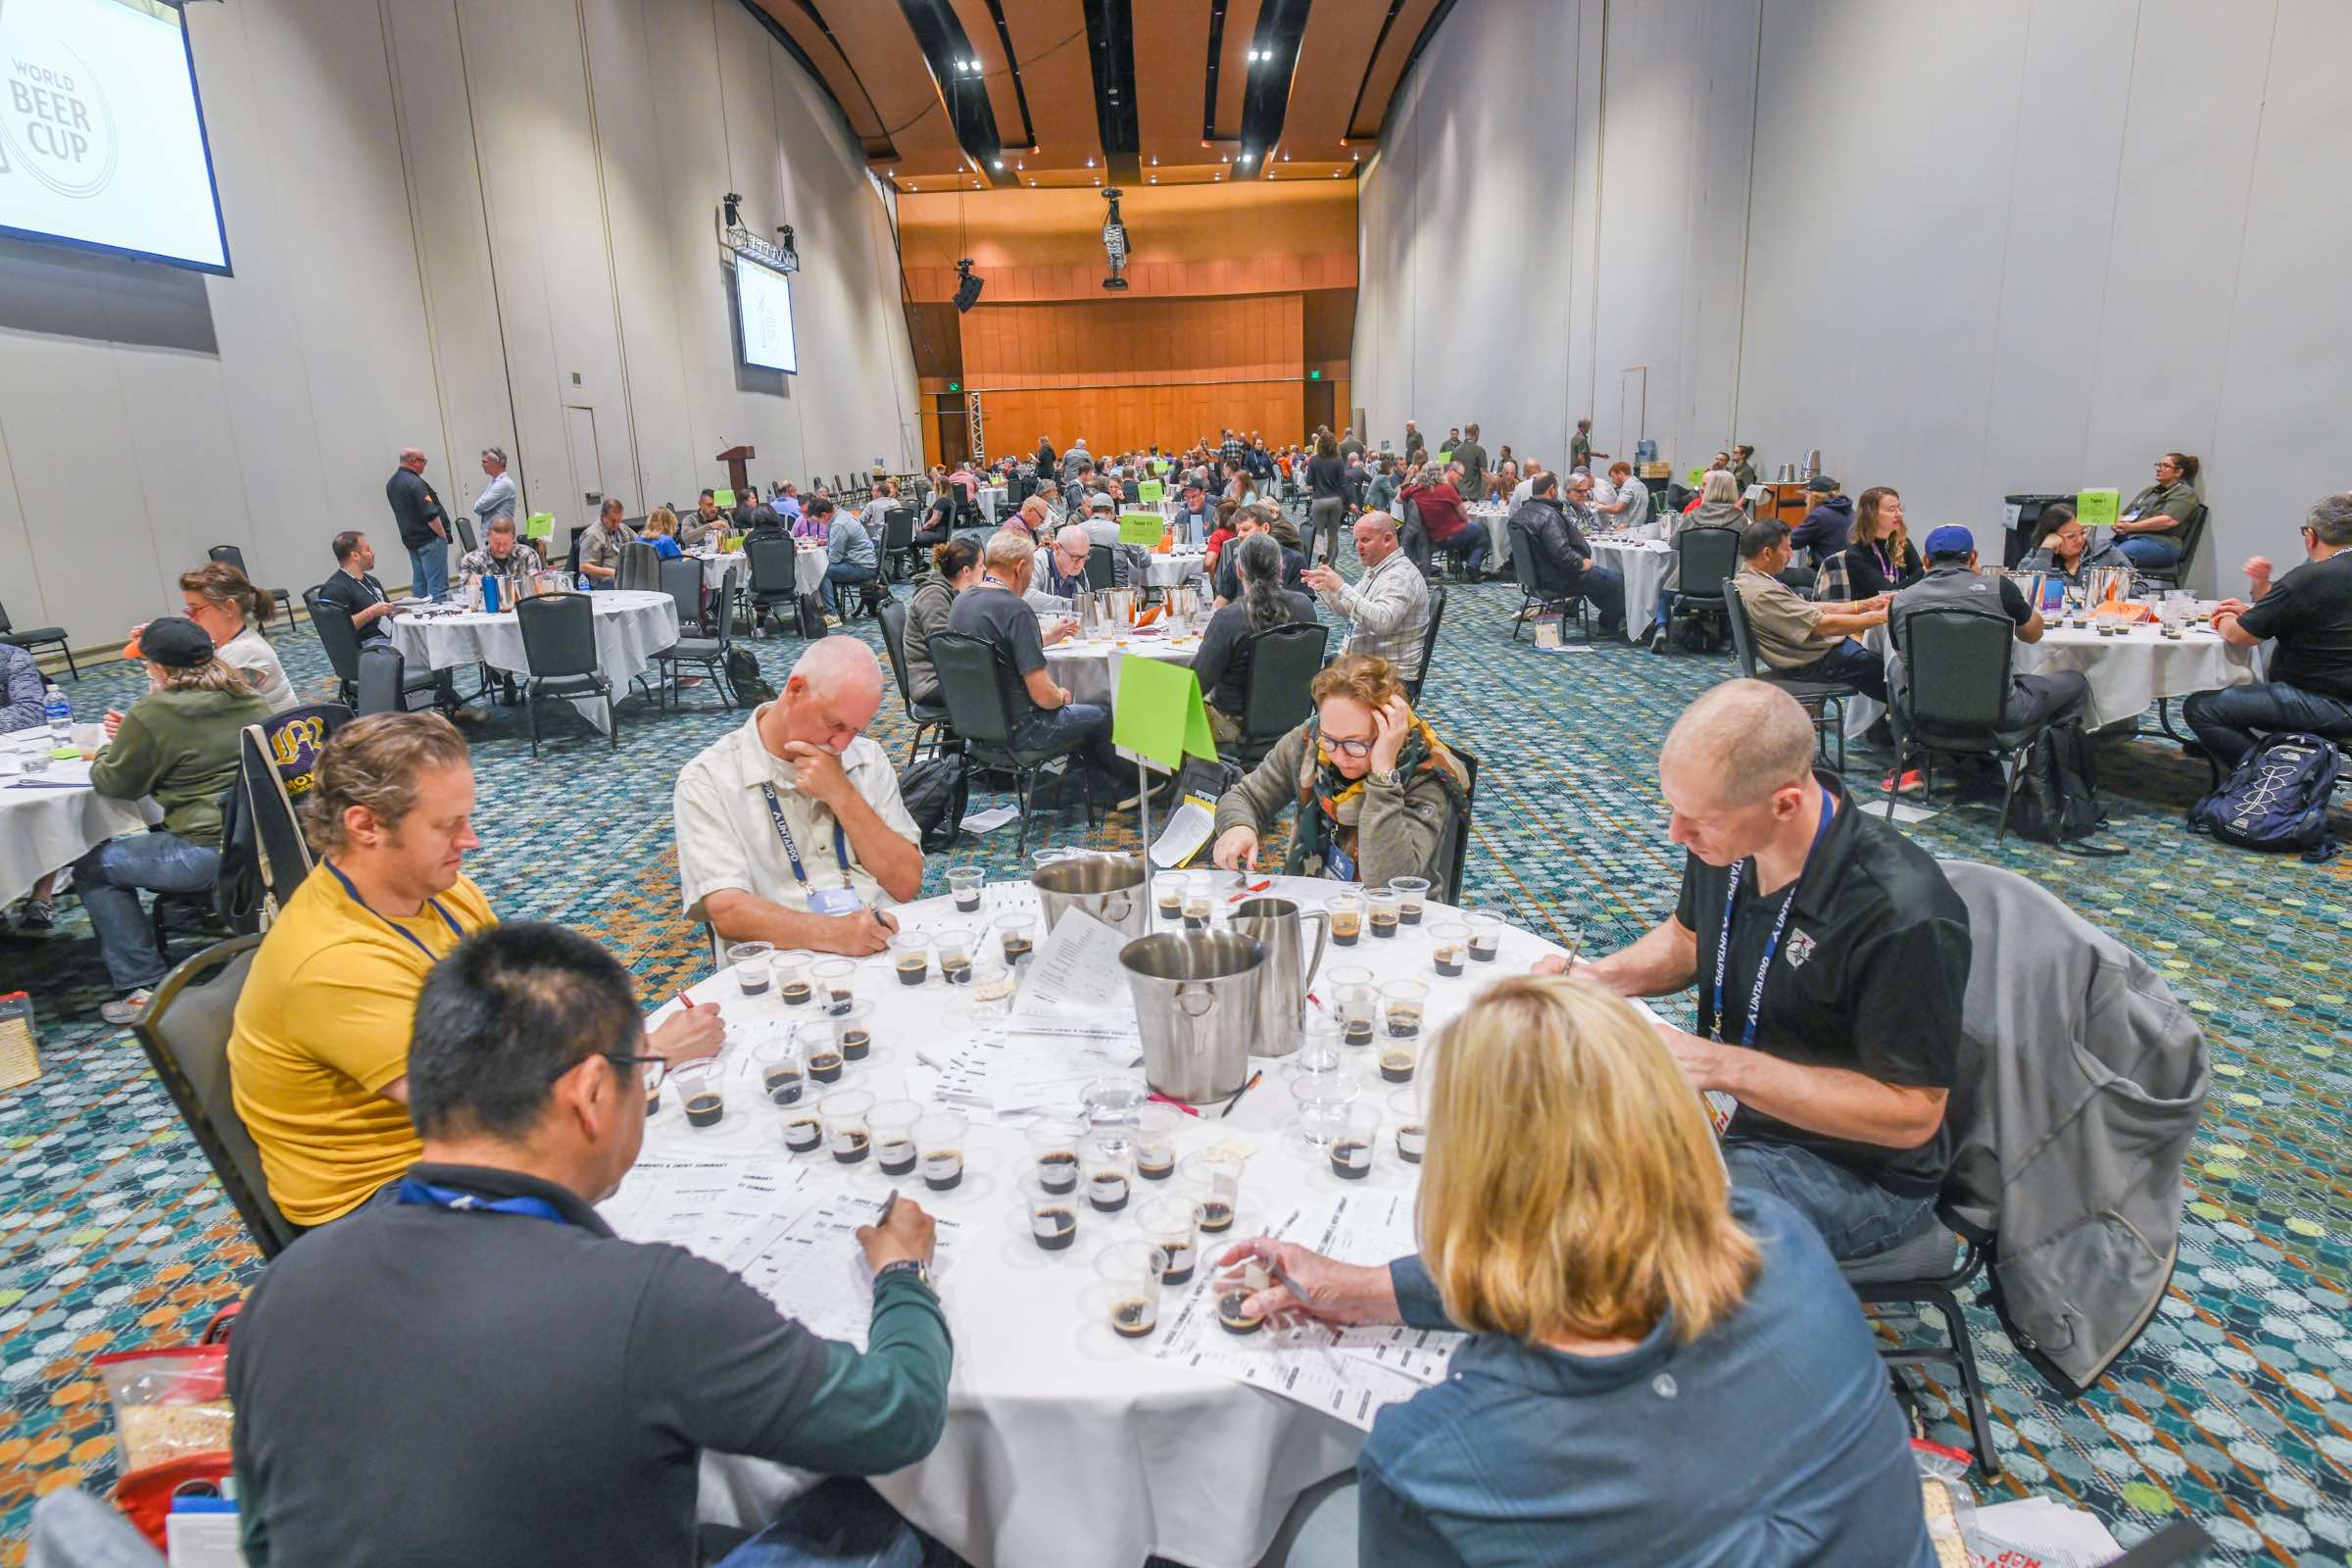 Judging at the 2023 World Beer Cup. (image courtesy of the Brewers Association)